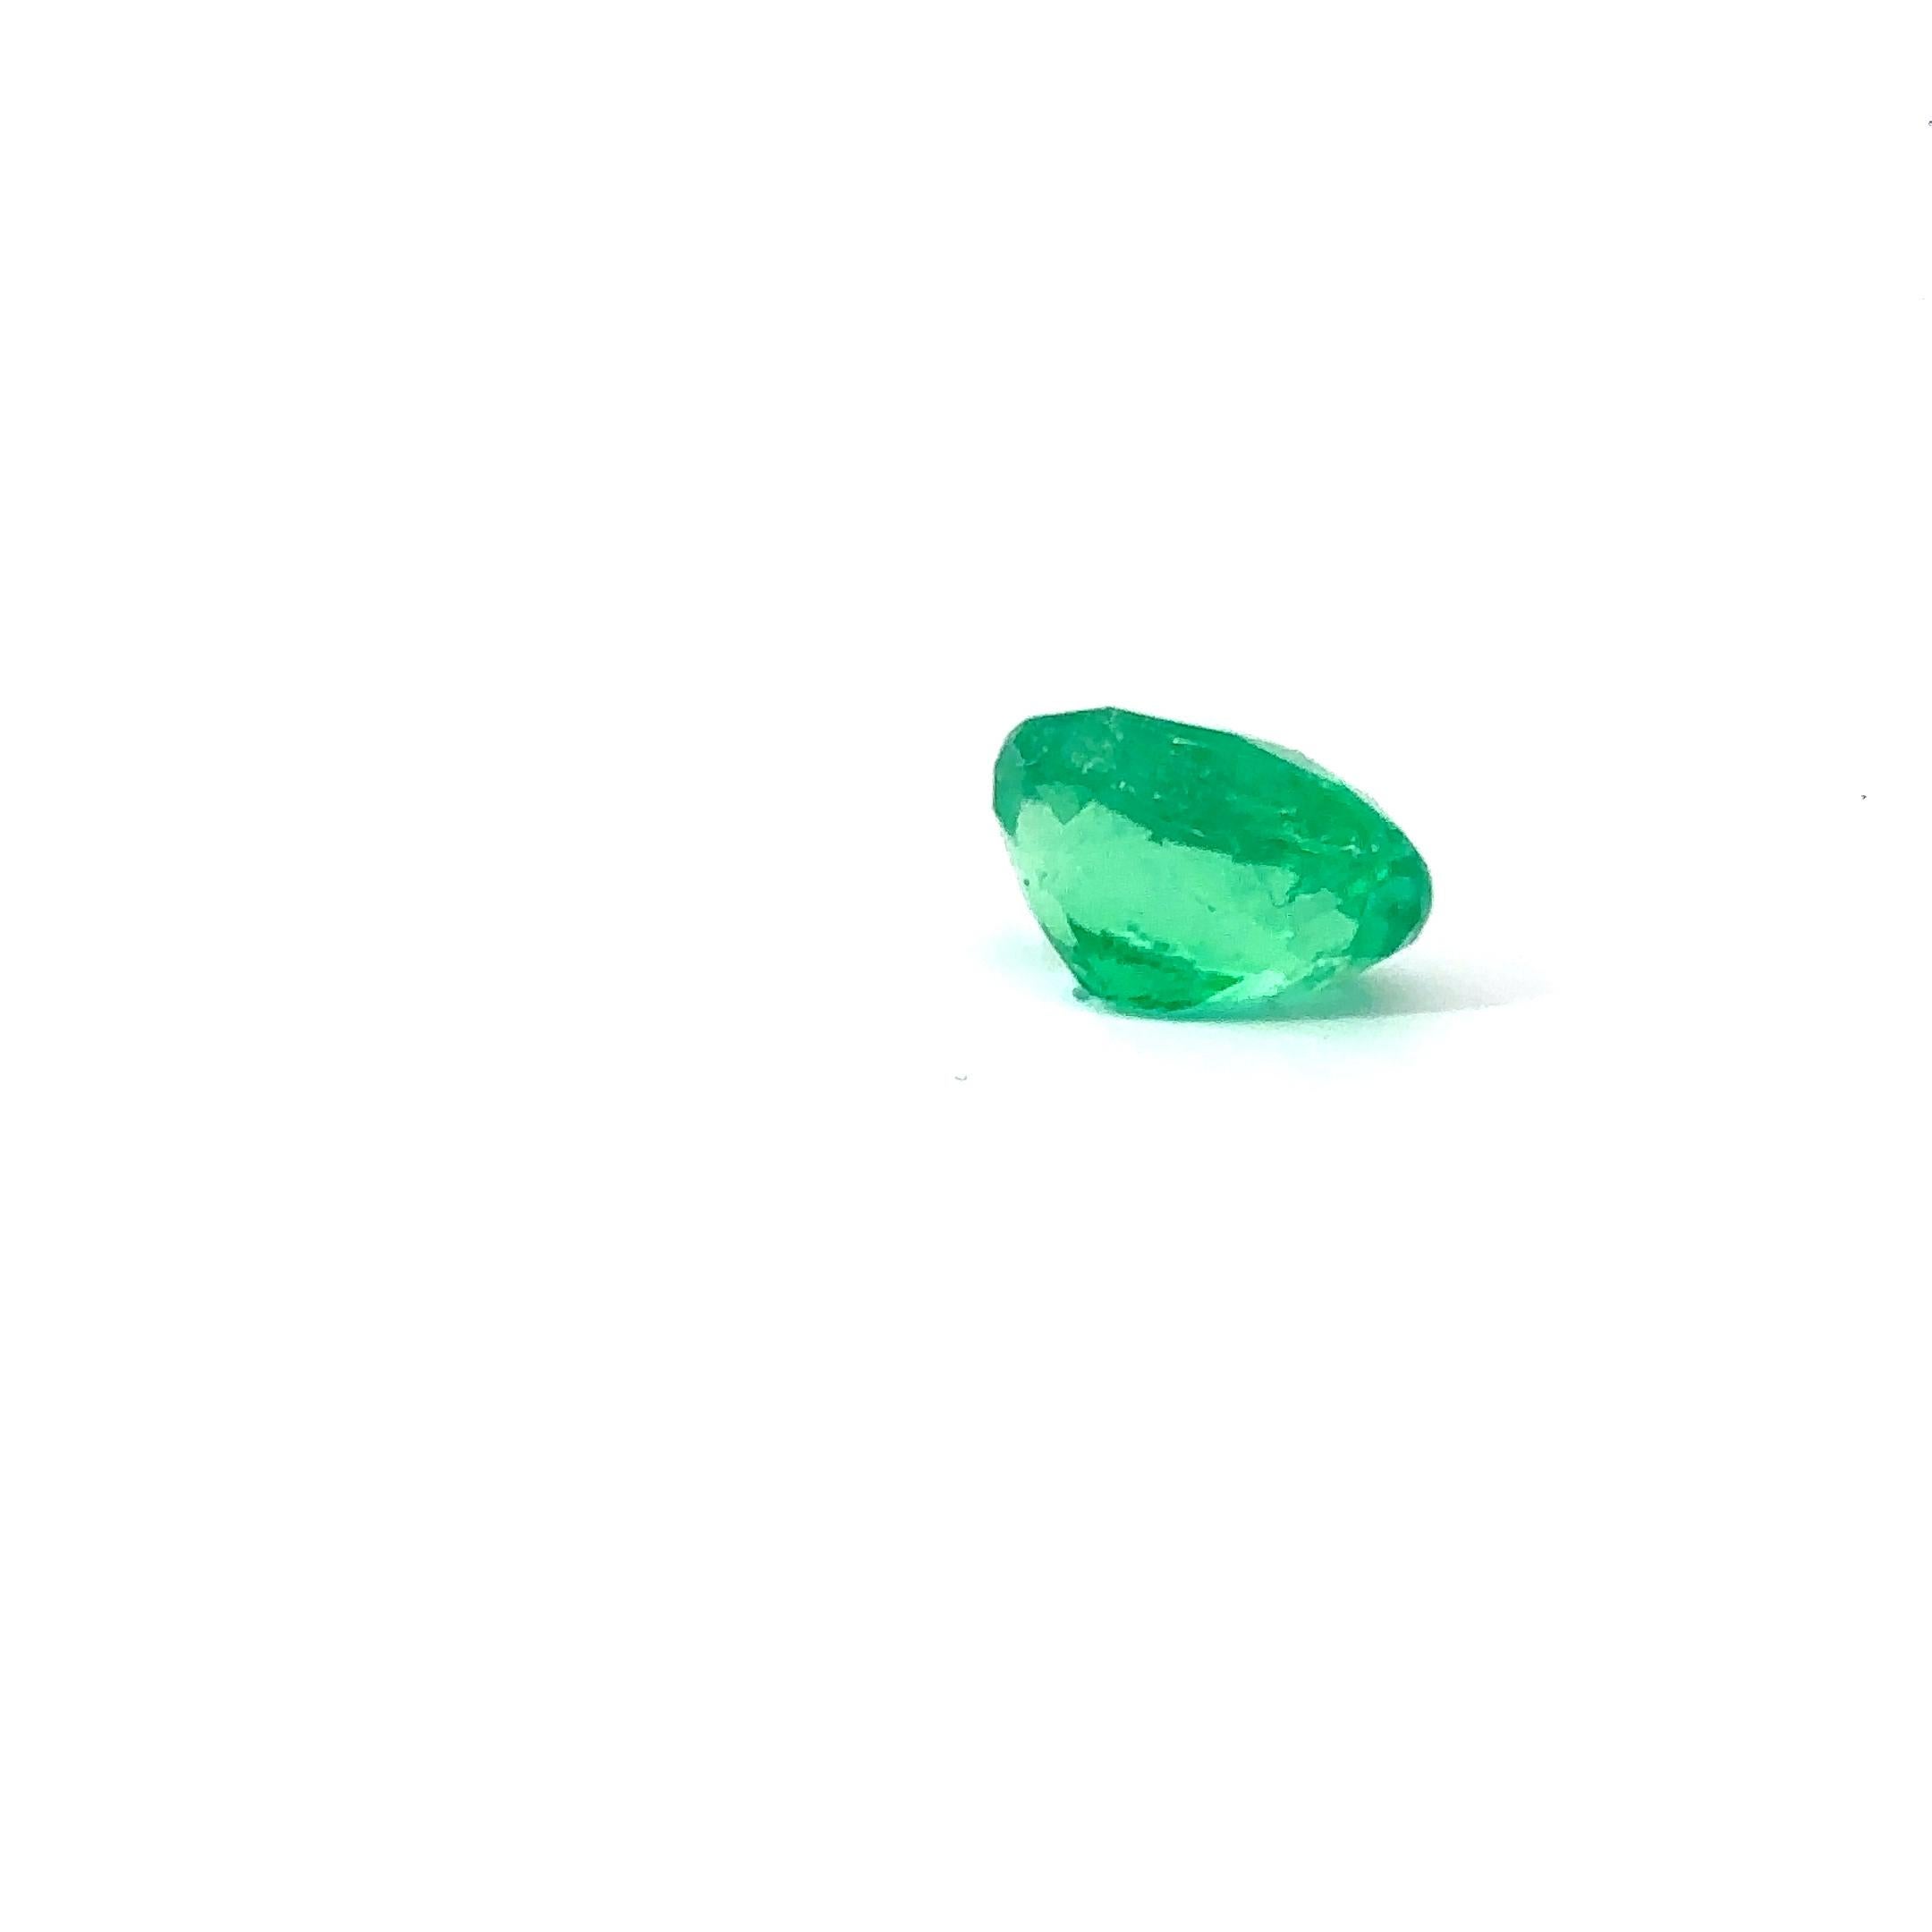 Artisan CDC Certified 5.0 Carat Colombia Emerald For Sale